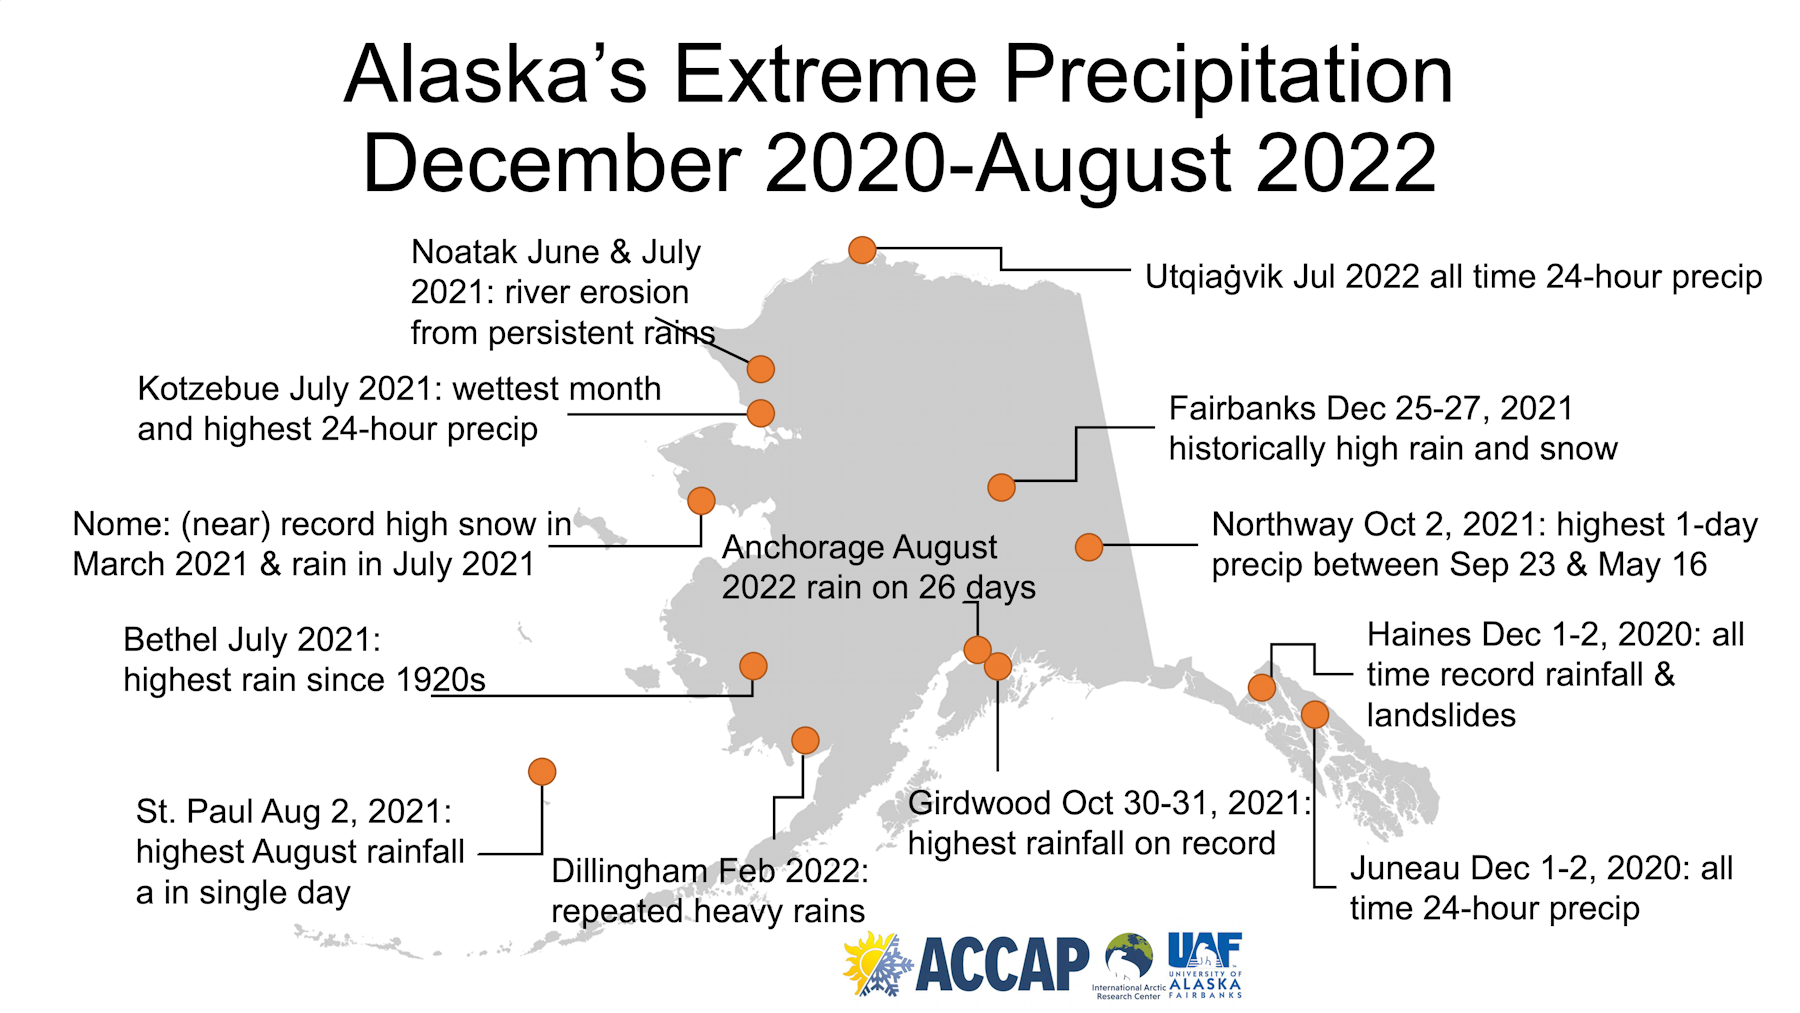 A map of Alaska showing extreme precipitation events from 2020-2022.